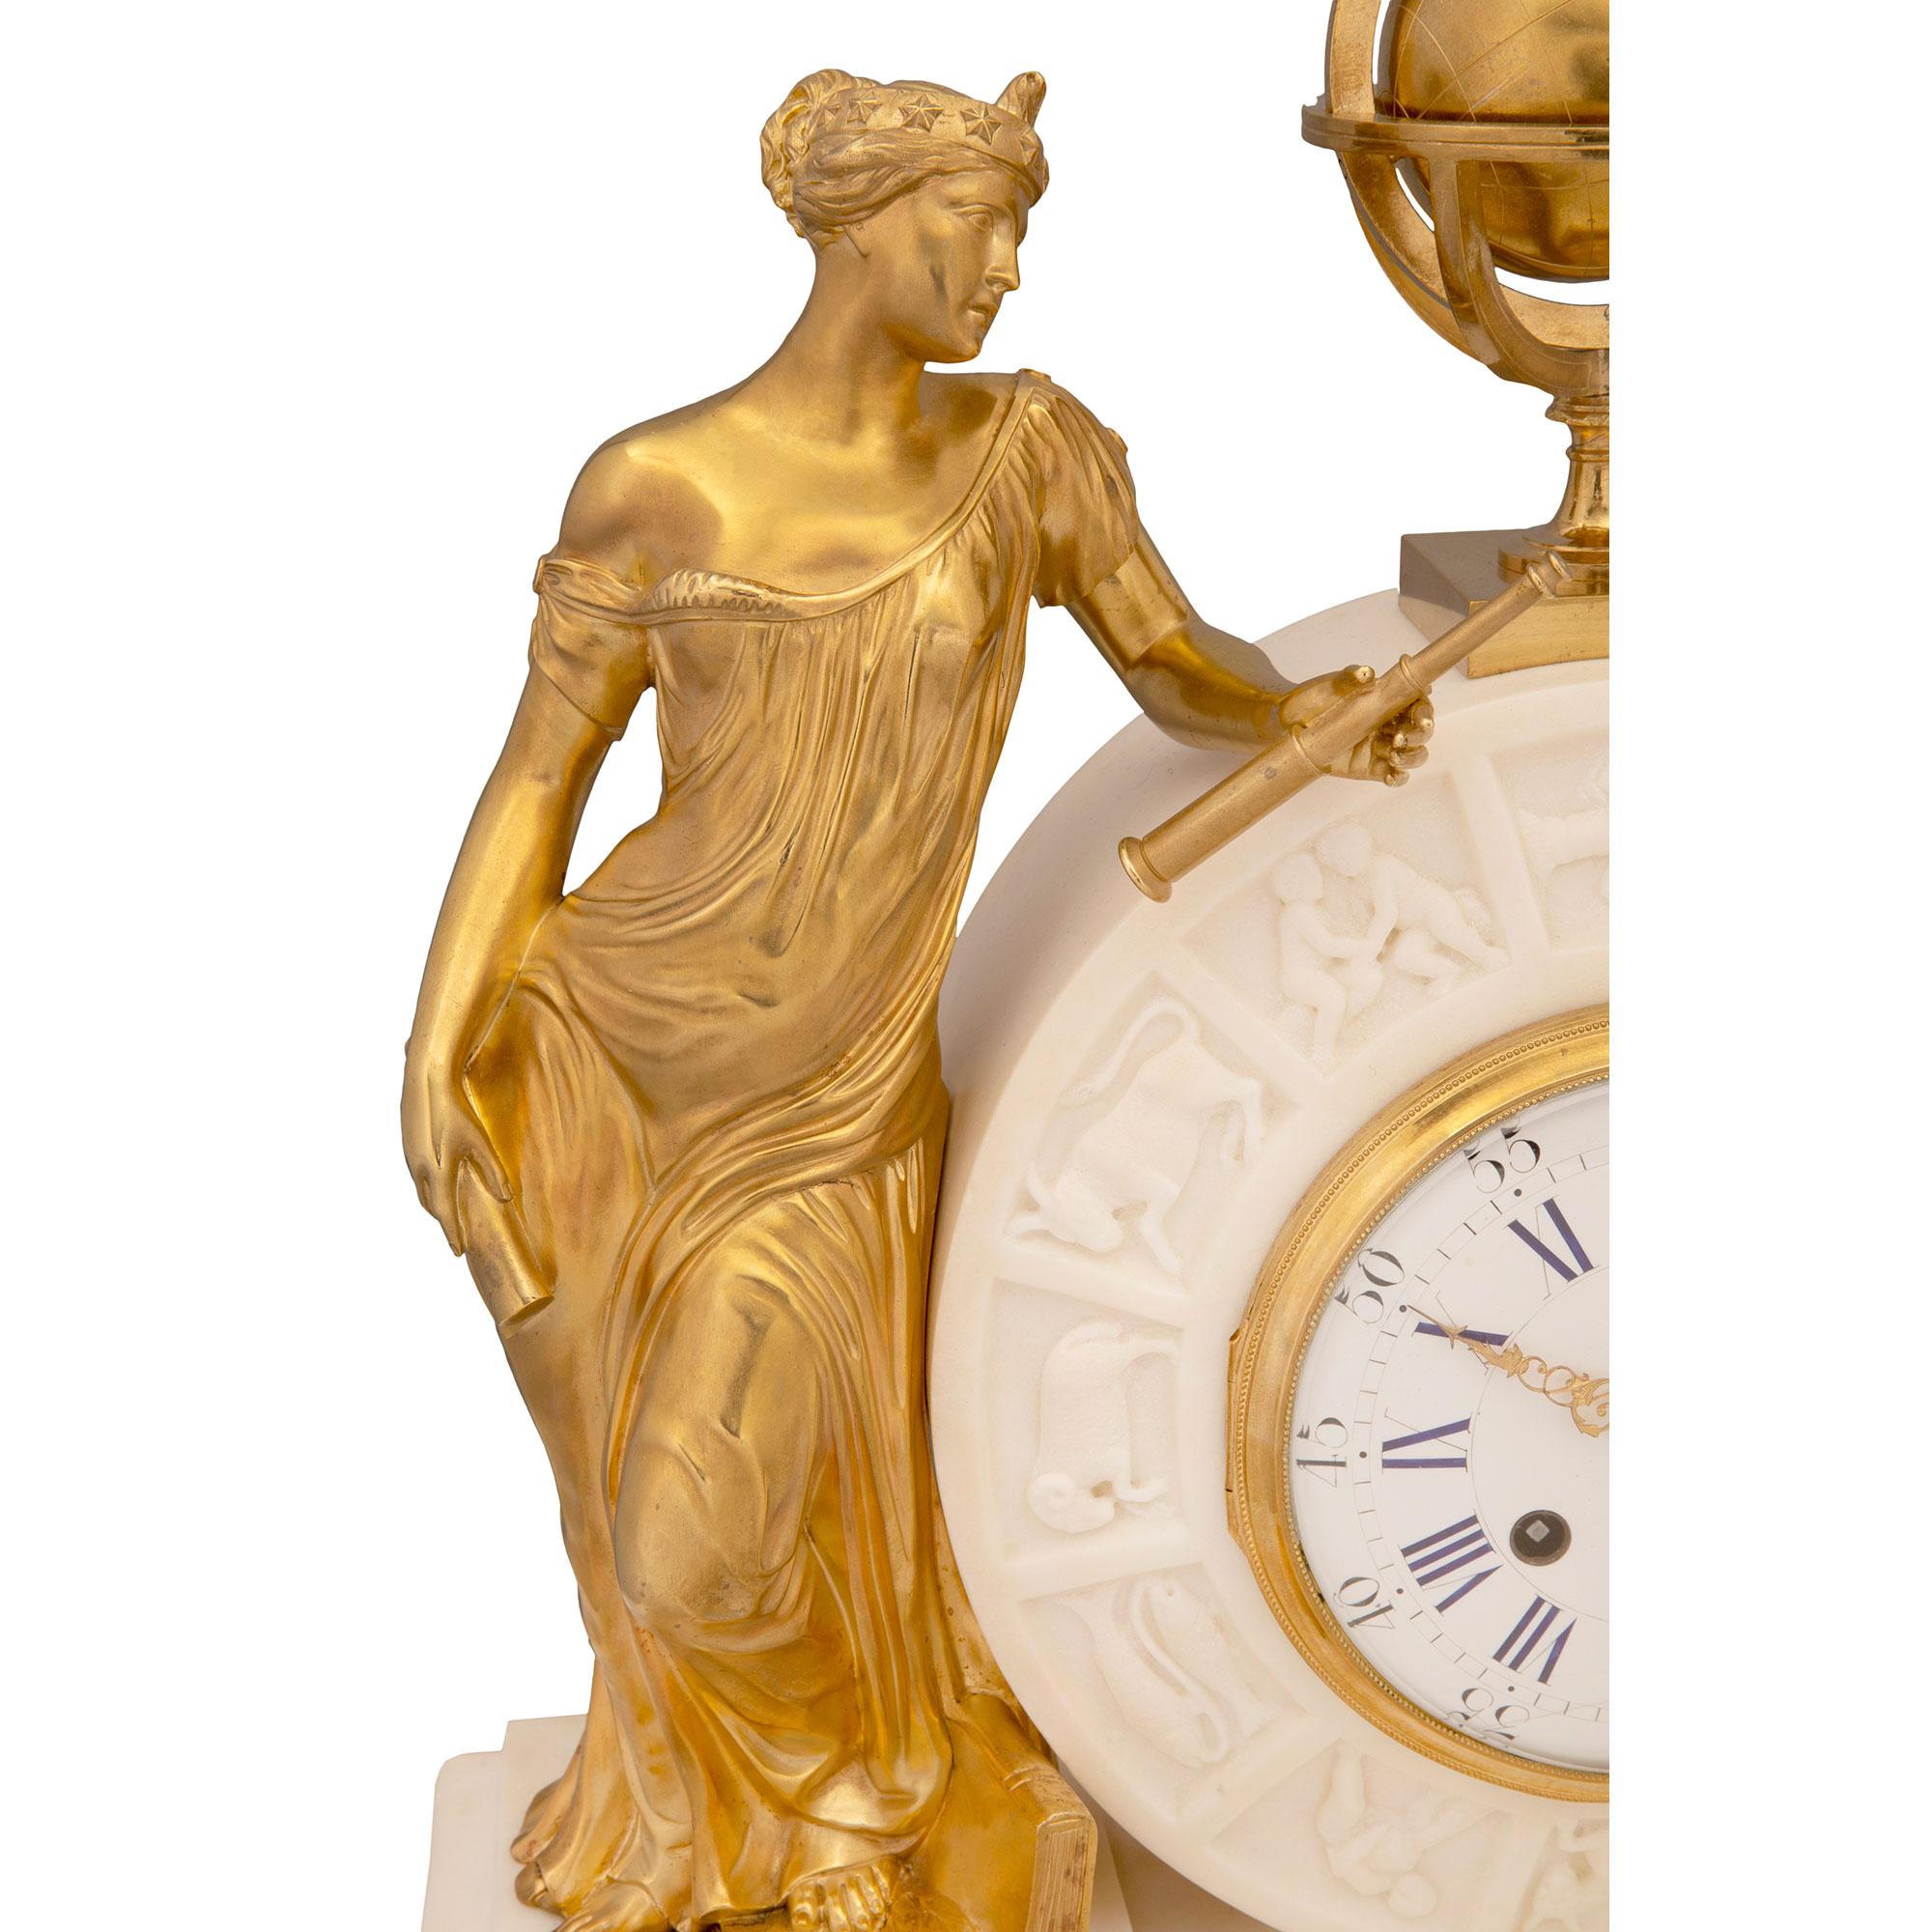 French 19th Century Louis XVI Style Marble and Ormolu Clock, by Alix À, Paris For Sale 2